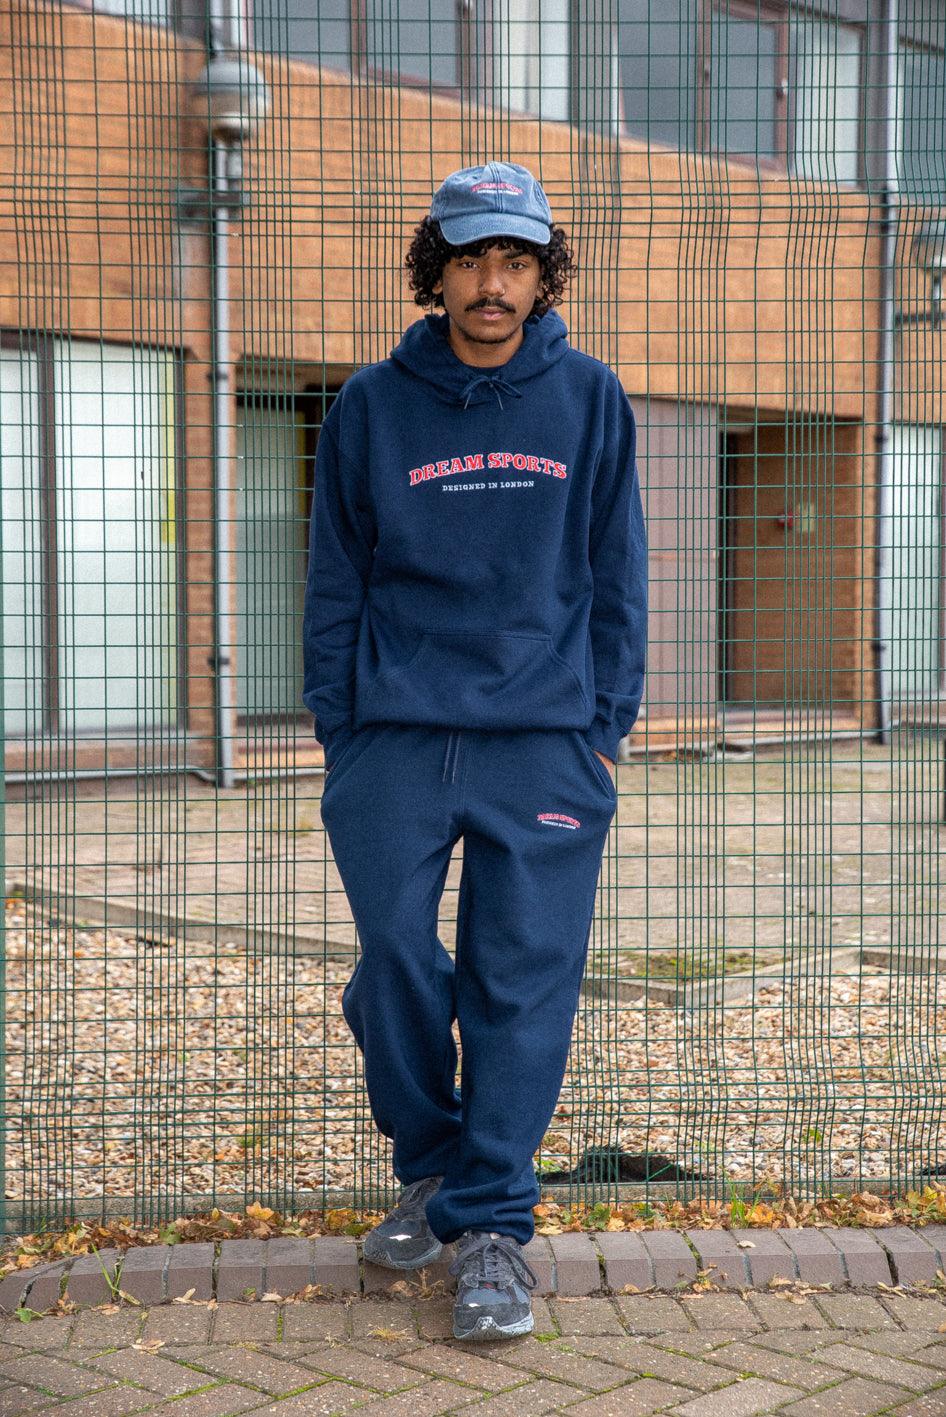 Hoodie in Navy with Dream Sports Embroidery - Dreambutdonotsleep